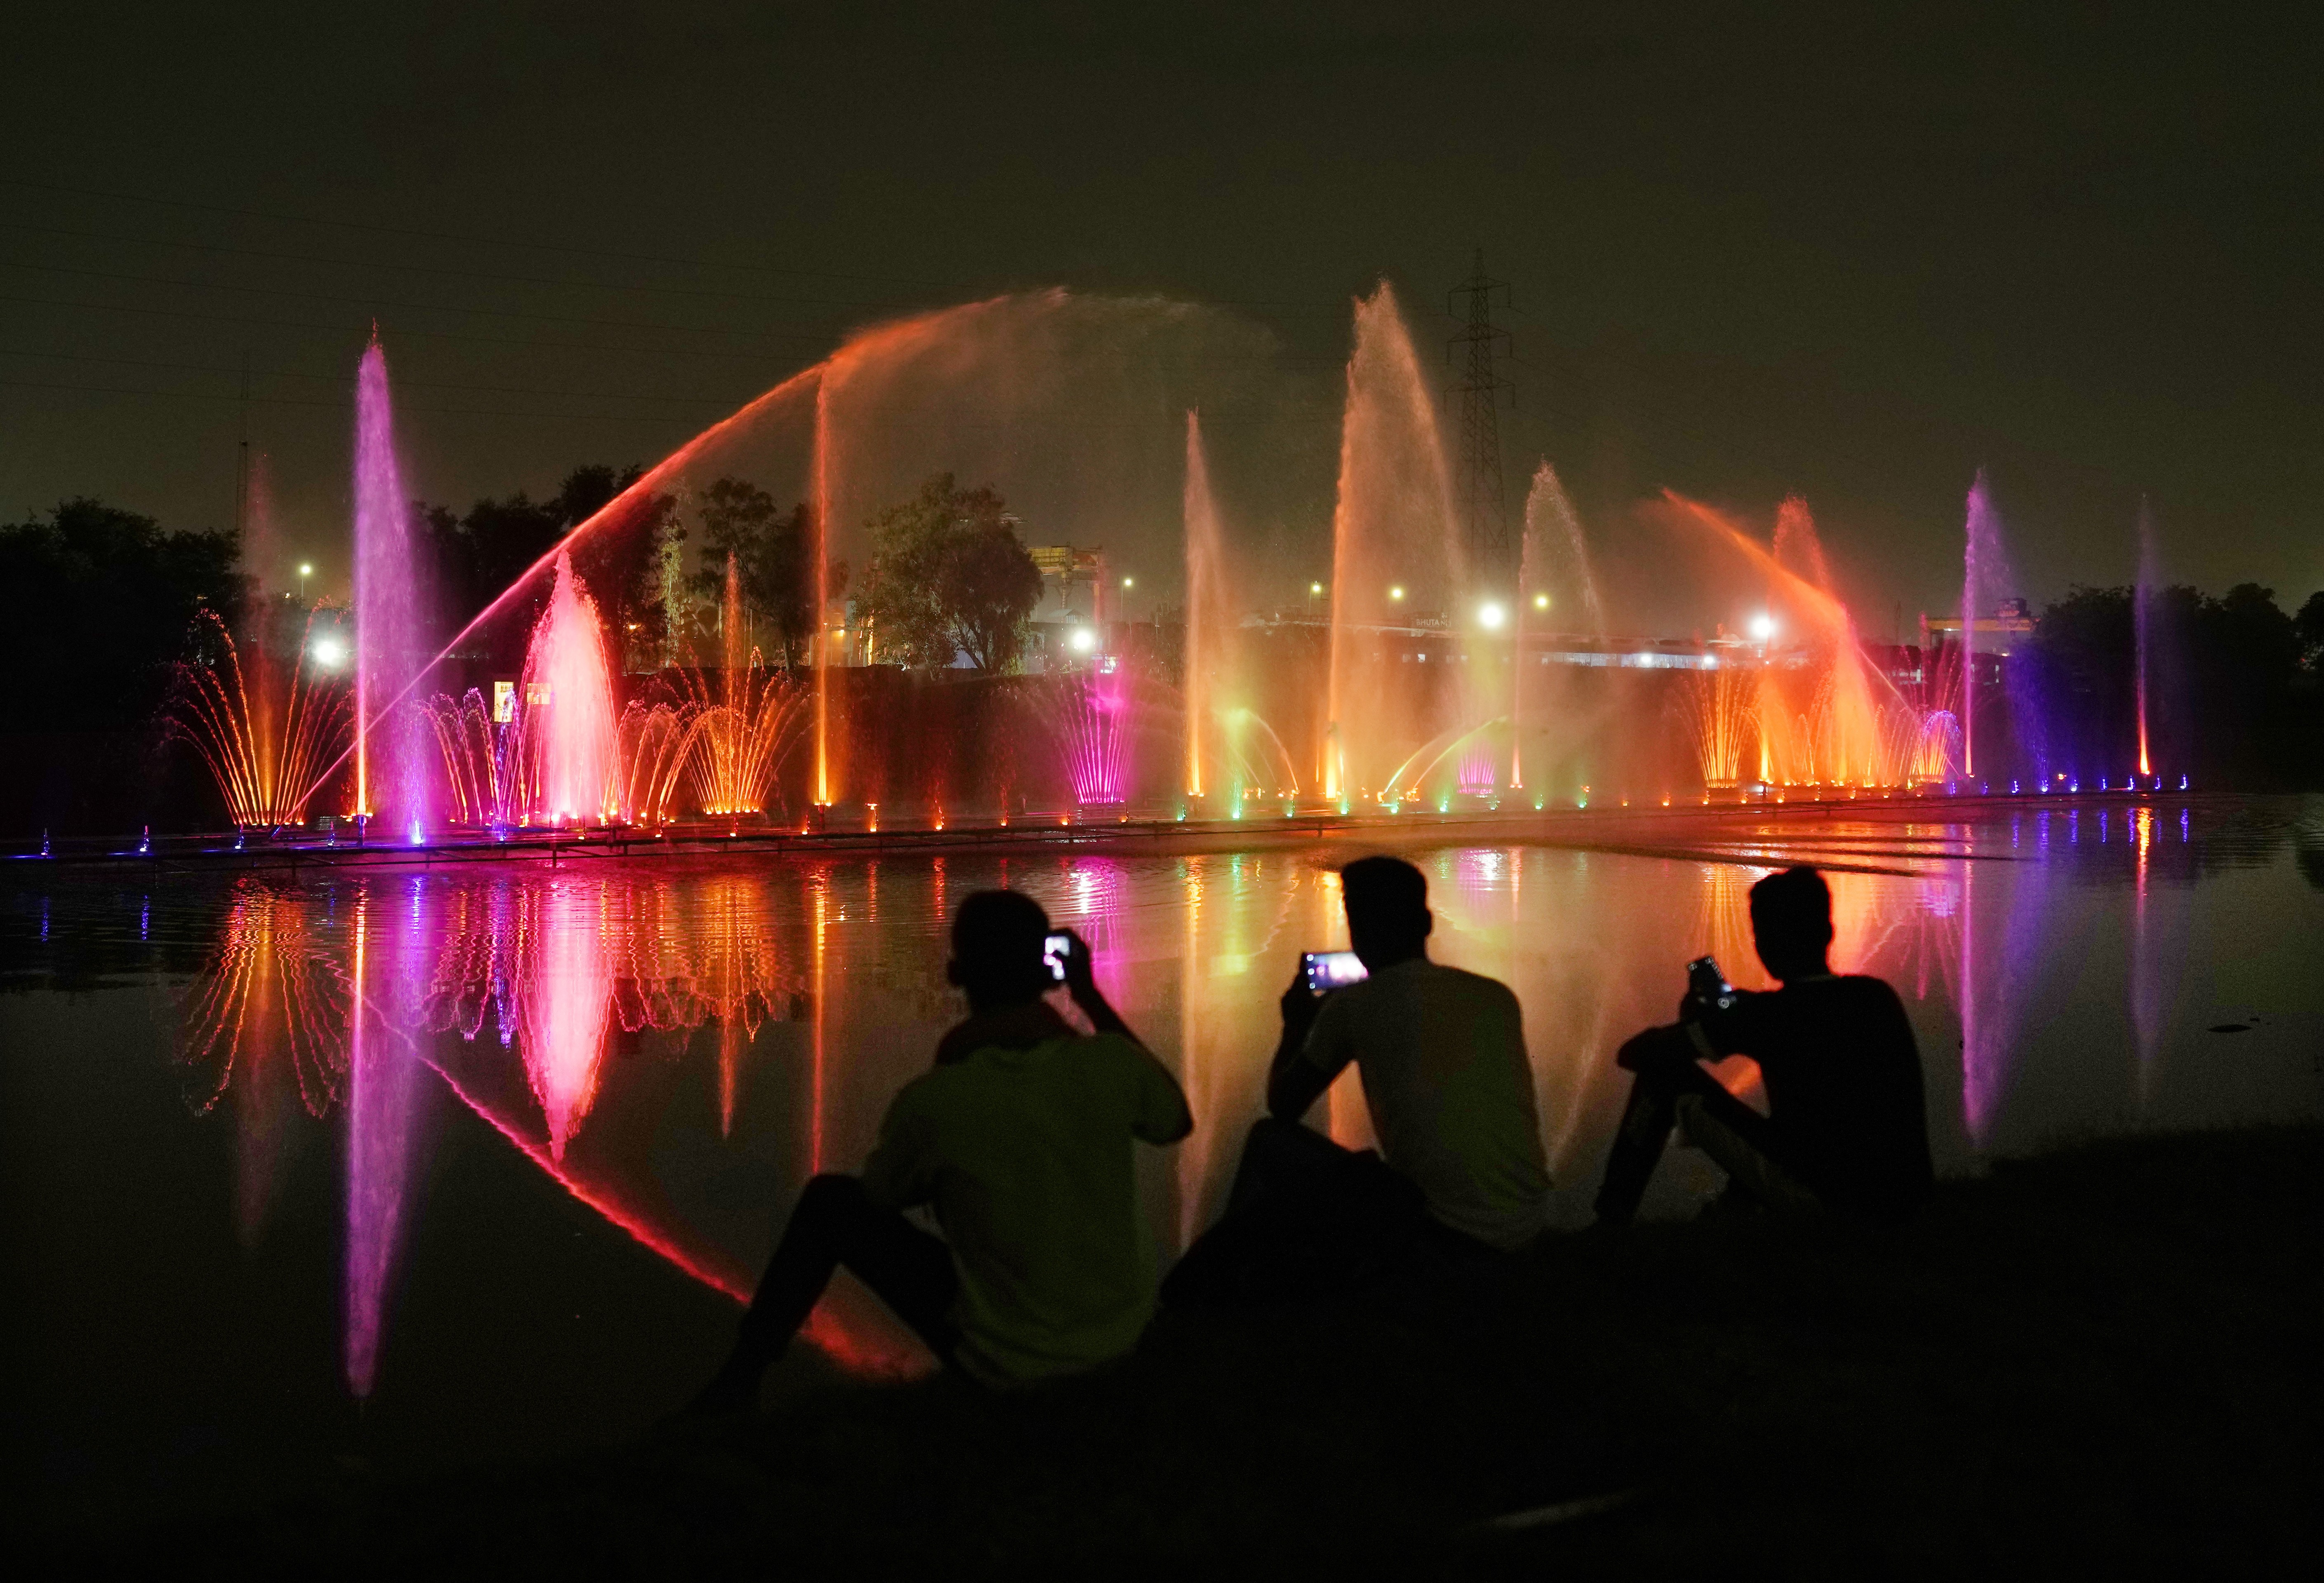 New Delhi got a makeover for the G20 summit. The city's poor say they were  simply erased - AlbertaPrimeTimes.com